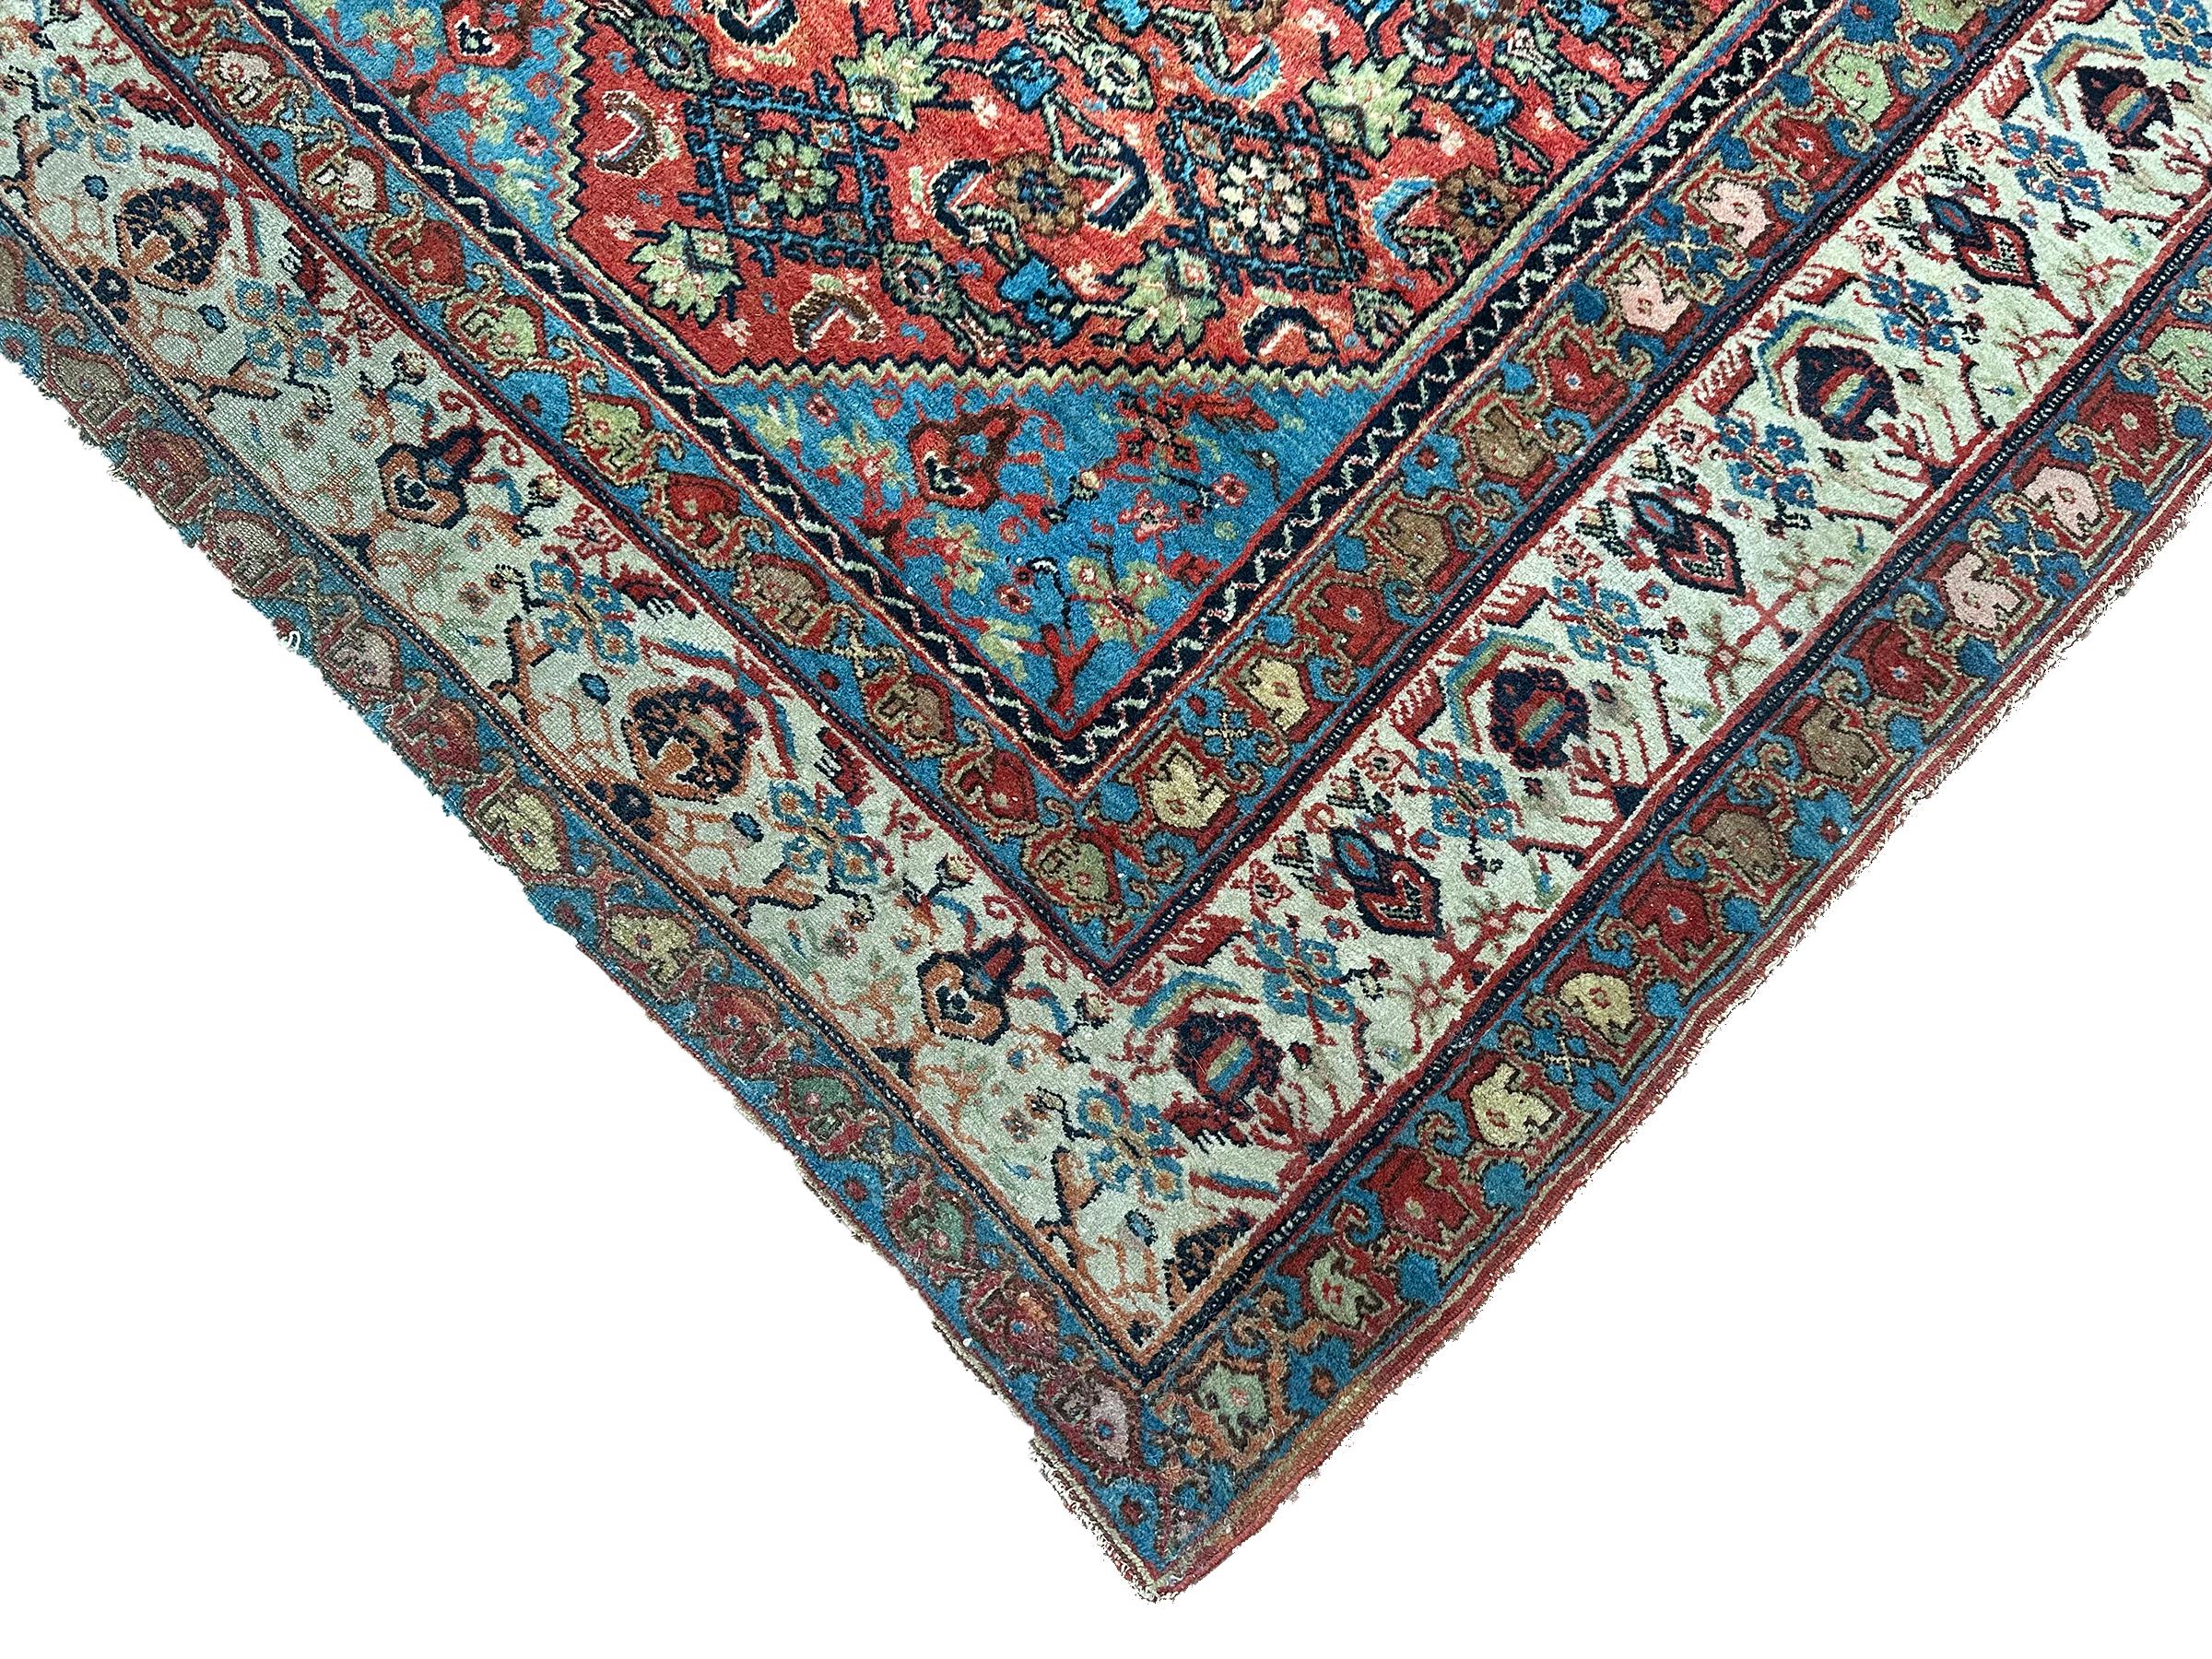 Late 19th Century 1890 Antique Traditional Oriental Rug Exceptionally fine Rug 5x6 153cm x 191cm For Sale